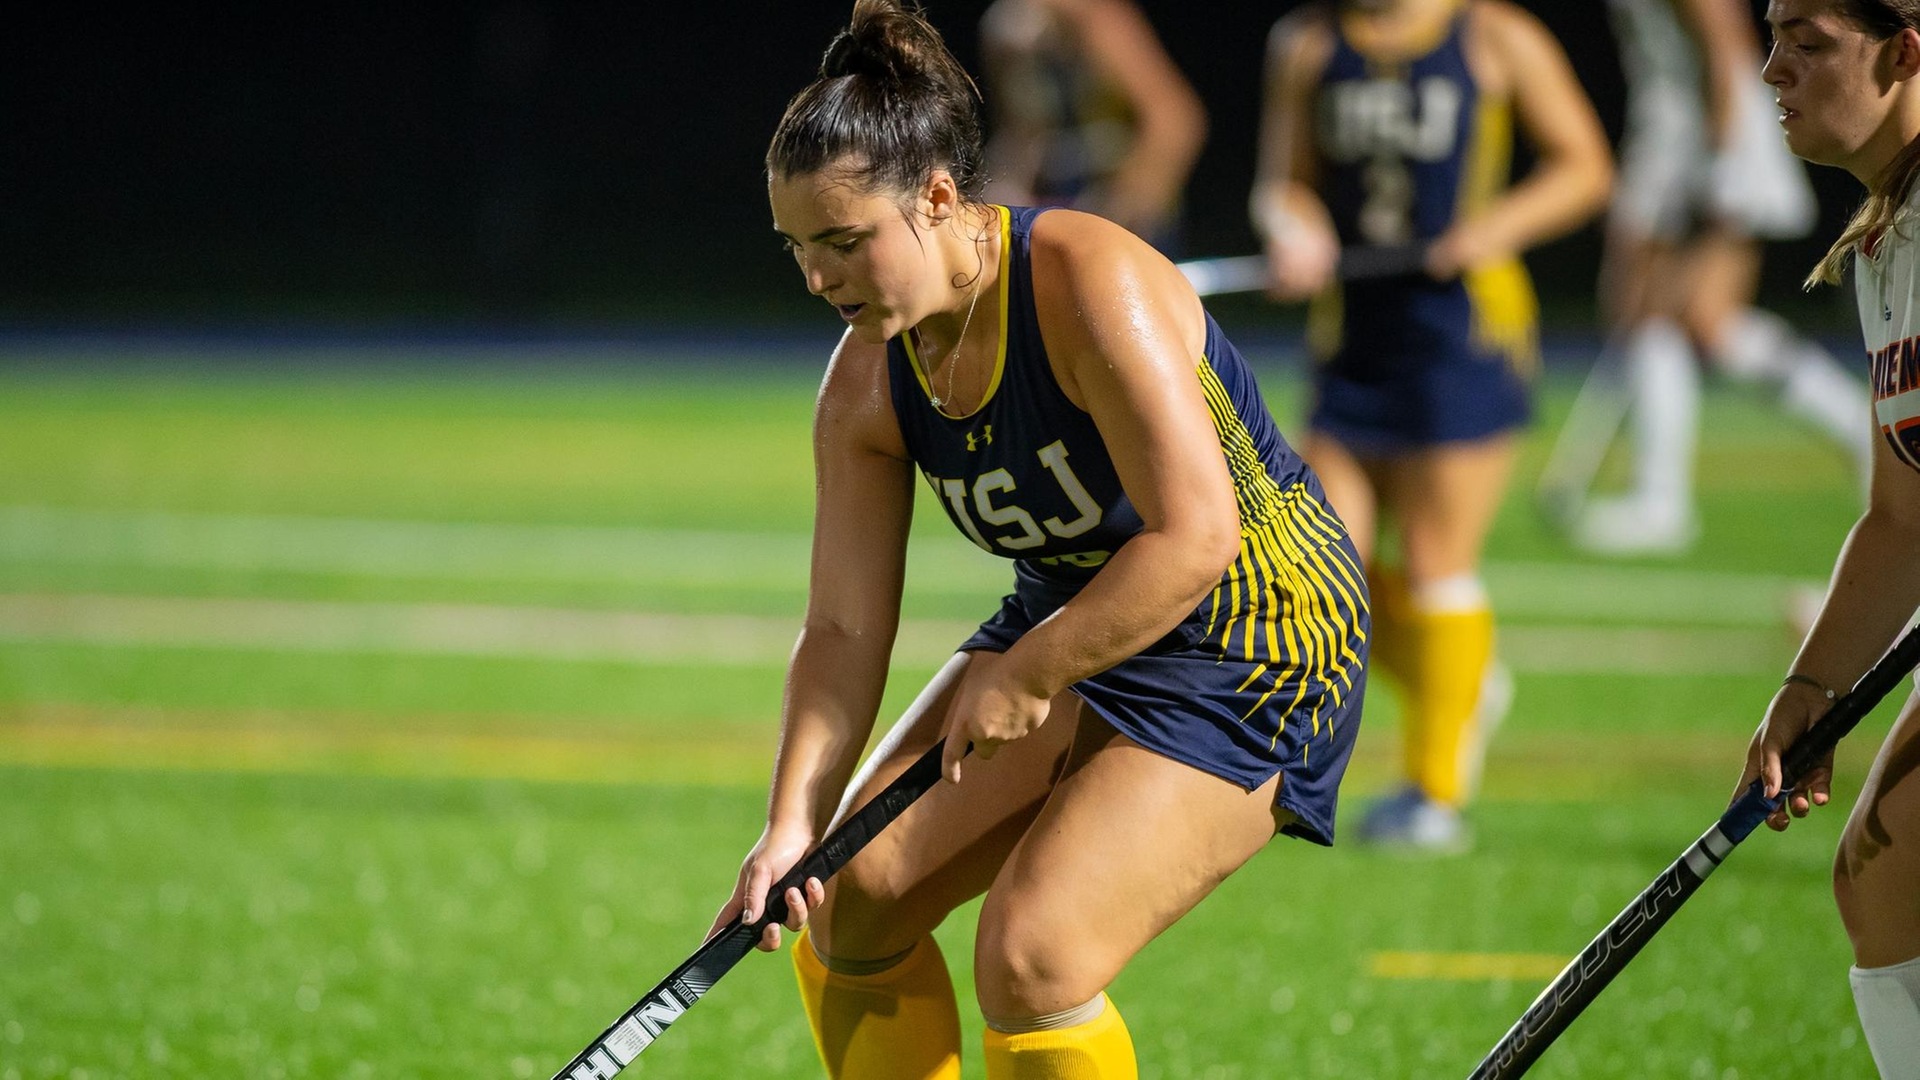 Field Hockey Dealt Setback at Home by Rivier Saturday, 5-2